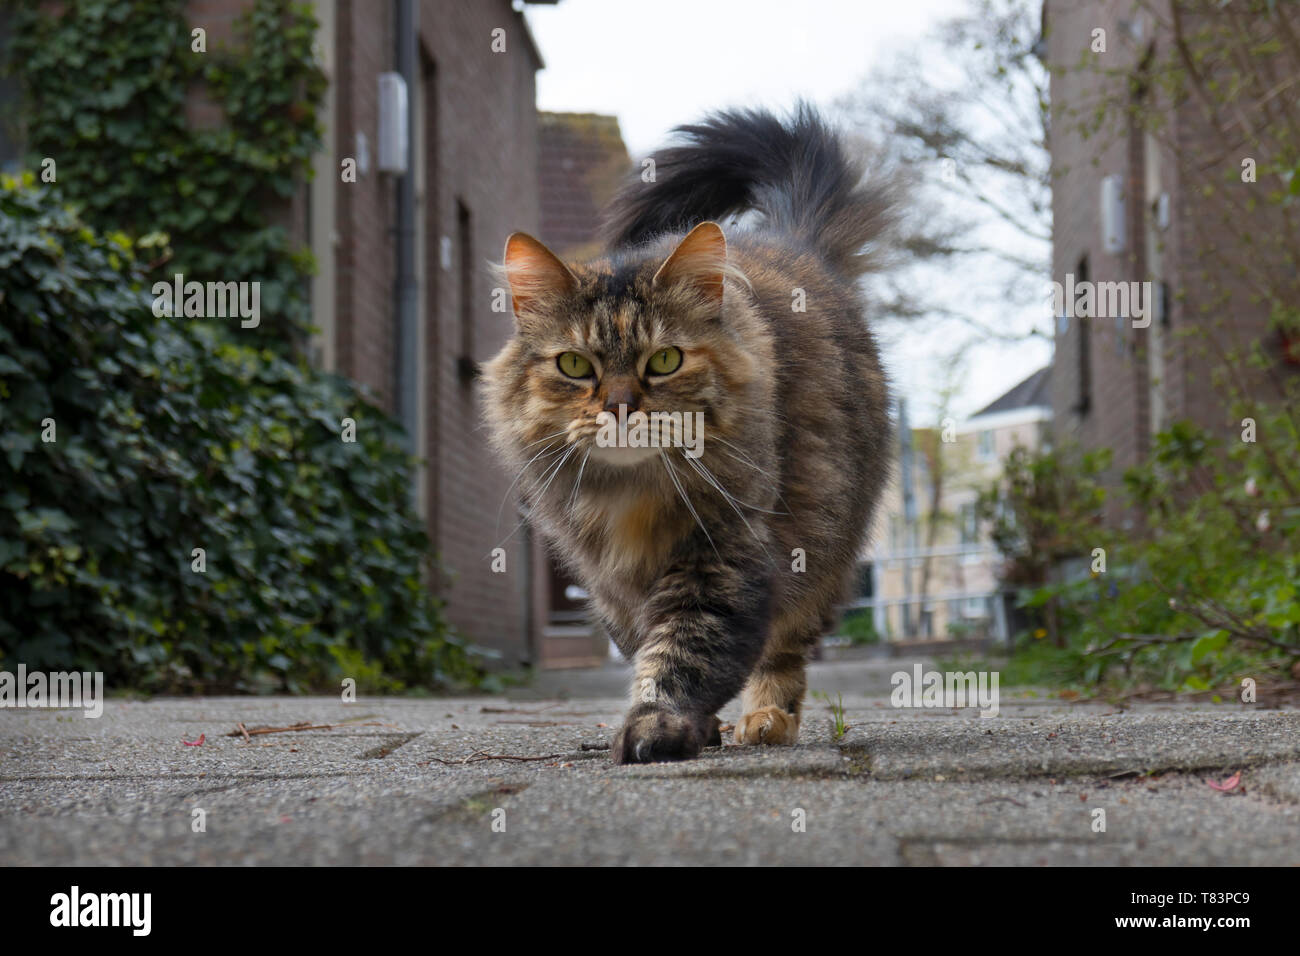 Leiden, Holland - April 4B, 2019: Long haired domestic tabby cat walking outside and looking into the camera Stock Photo